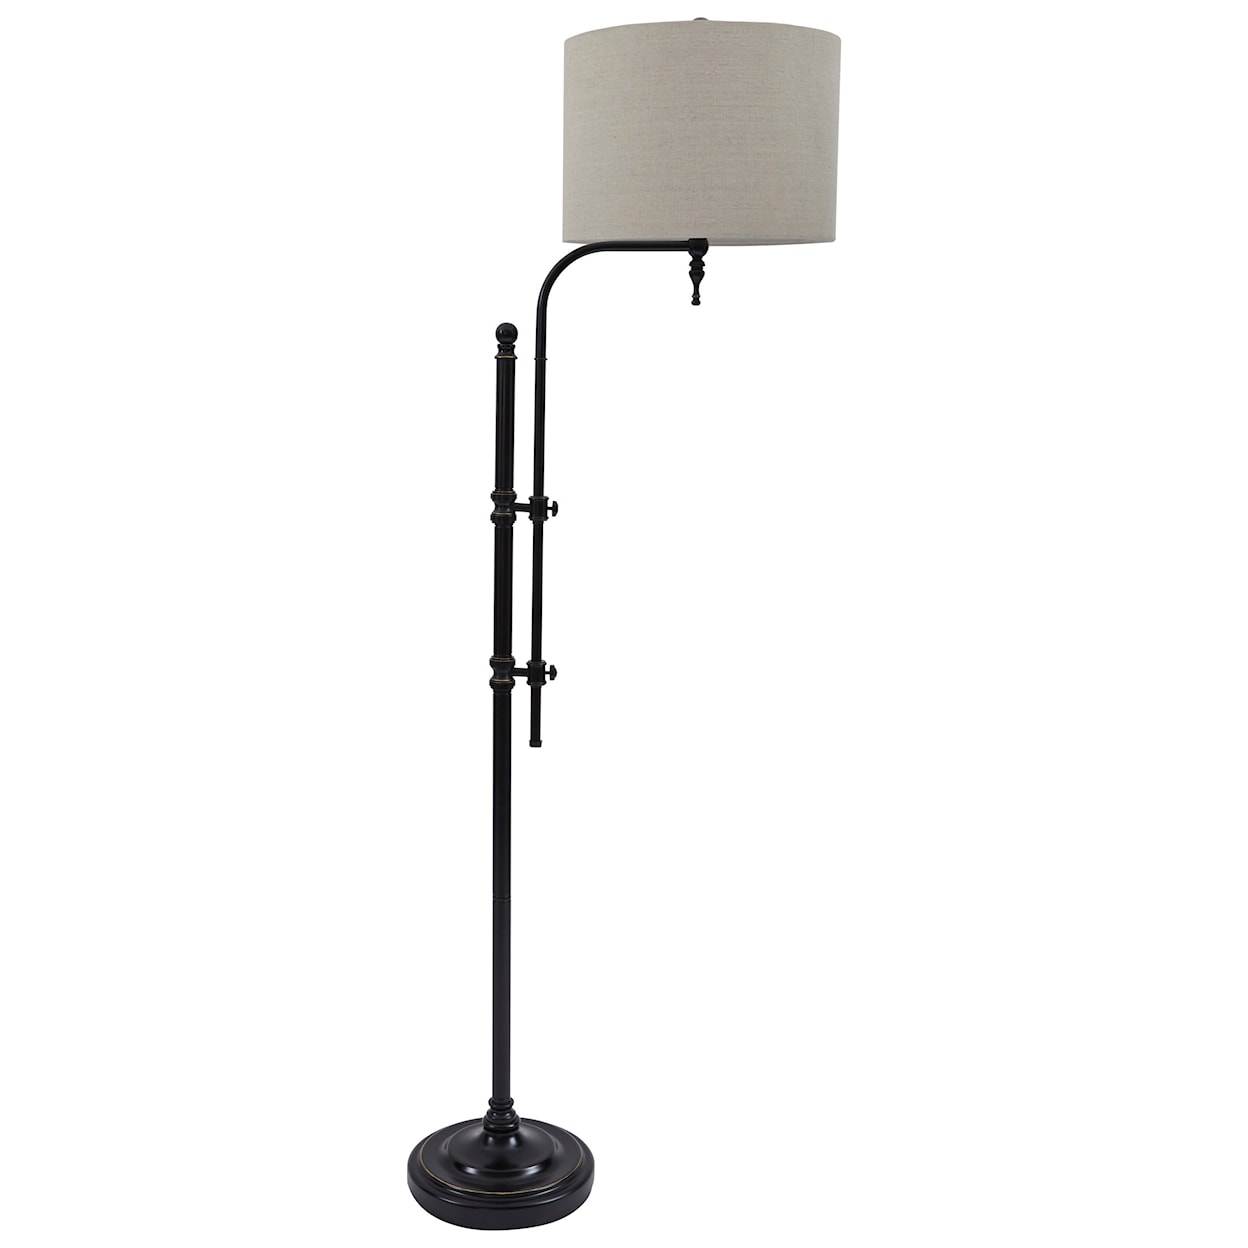 Signature Design by Ashley Lamps - Vintage Style Anemoon Black Metal Floor Lamp